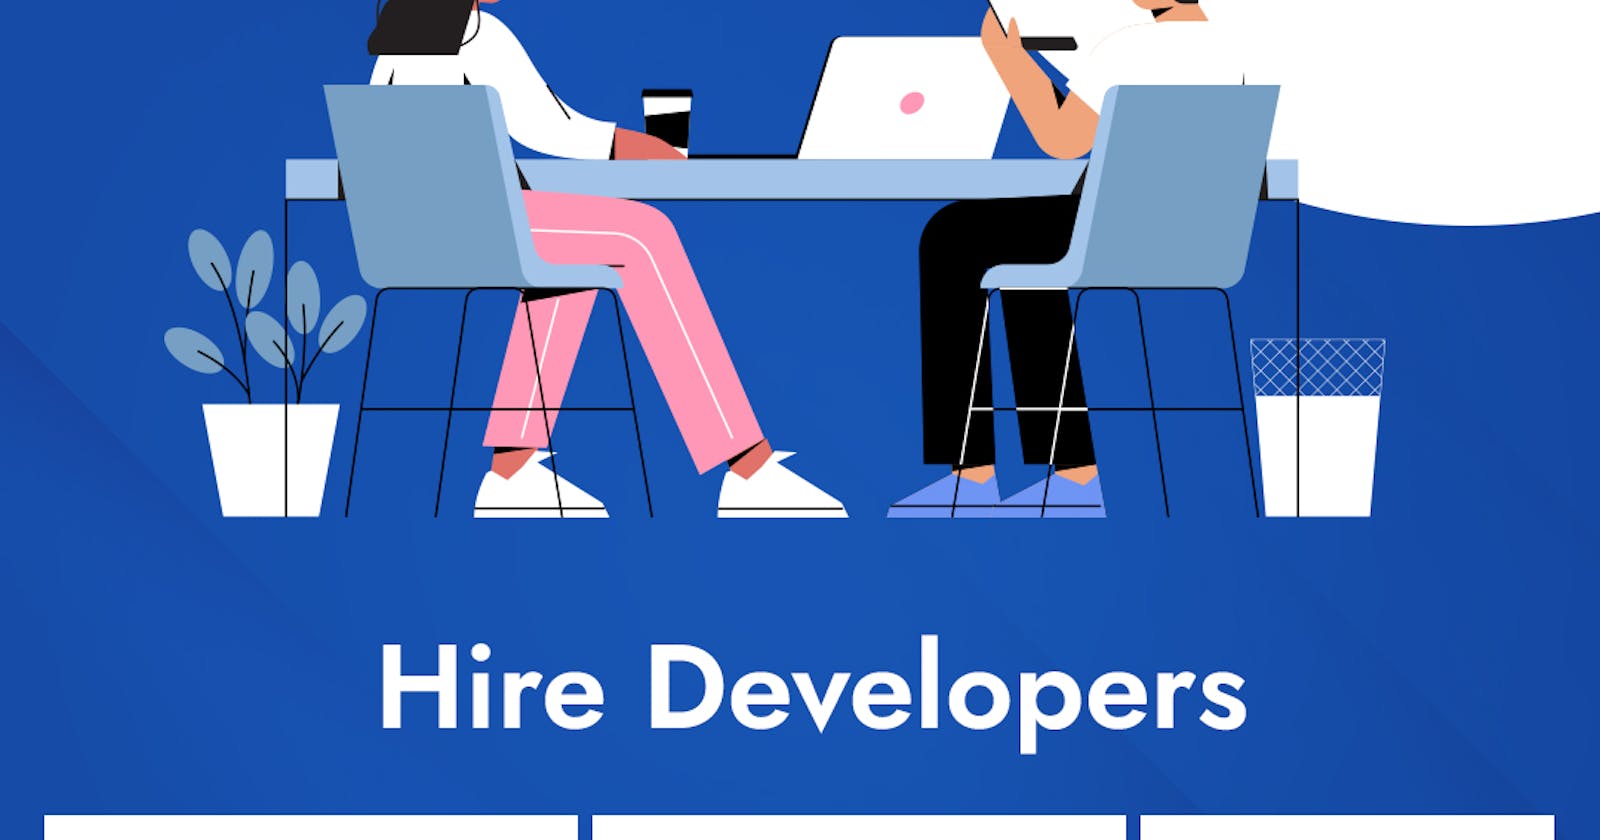 What are the reasons to hire Laravel developers?